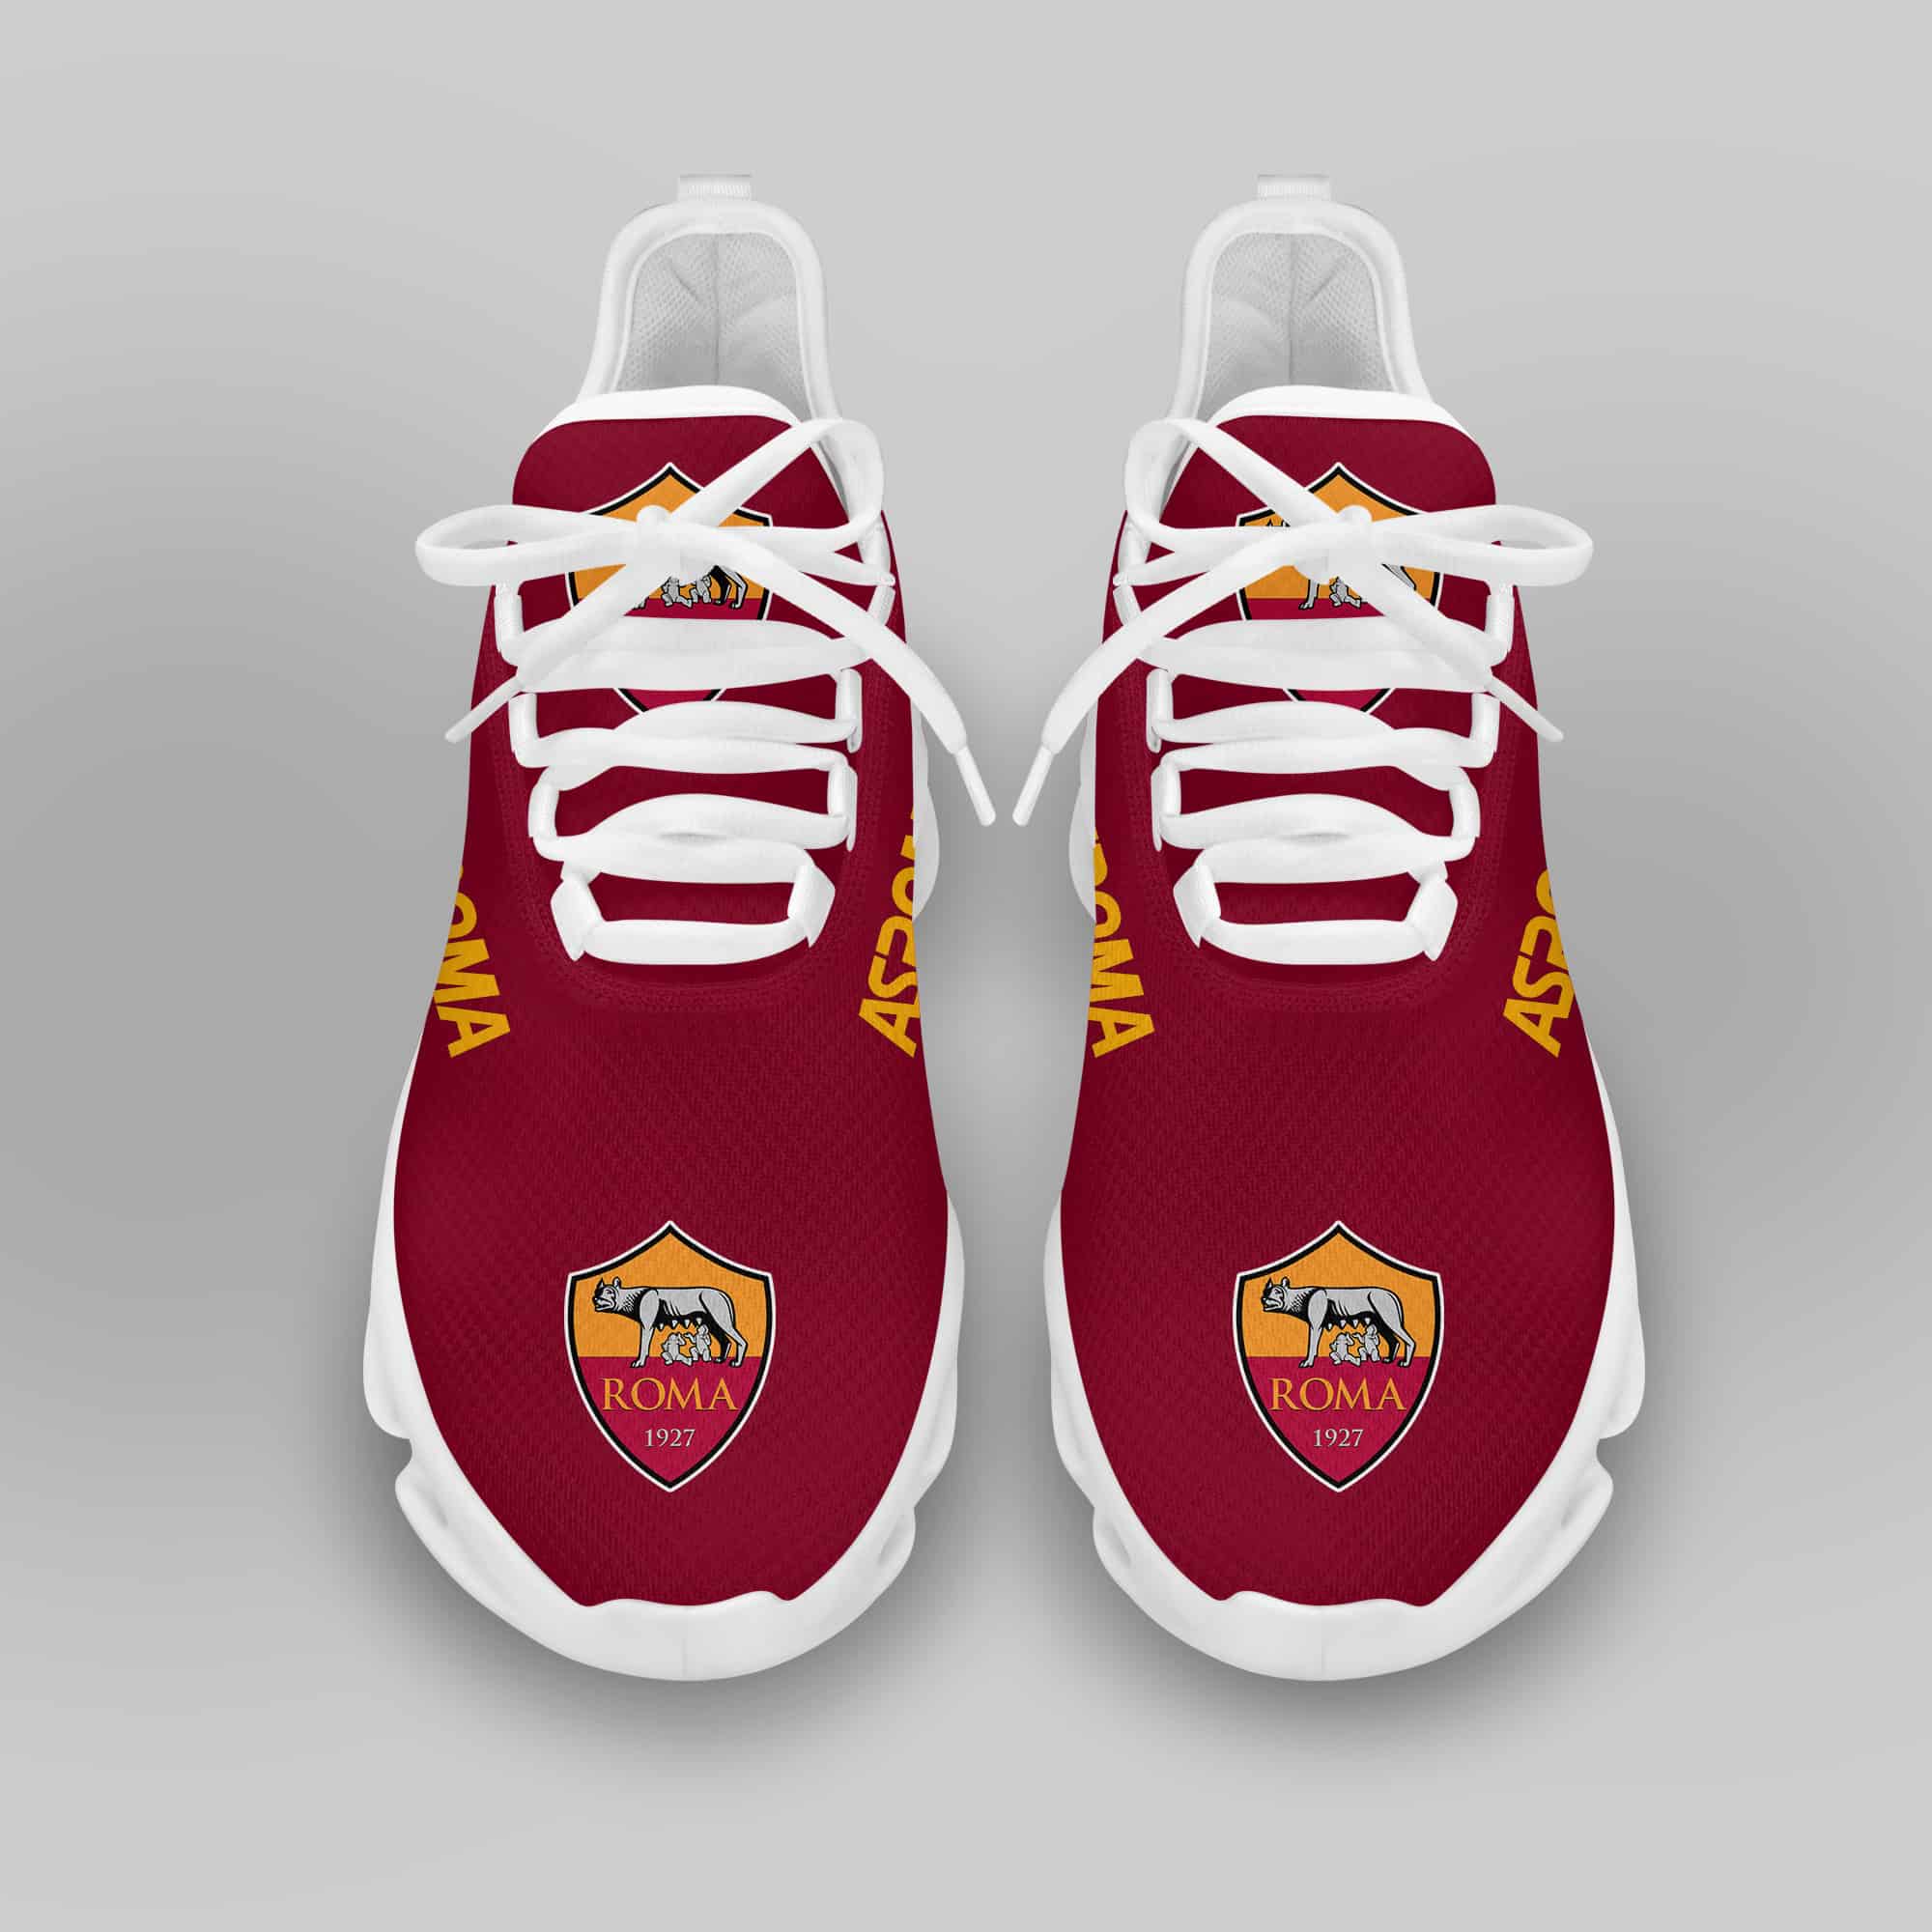 As Roma Running Shoes Max Soul Shoes Sneakers Ver 12 3